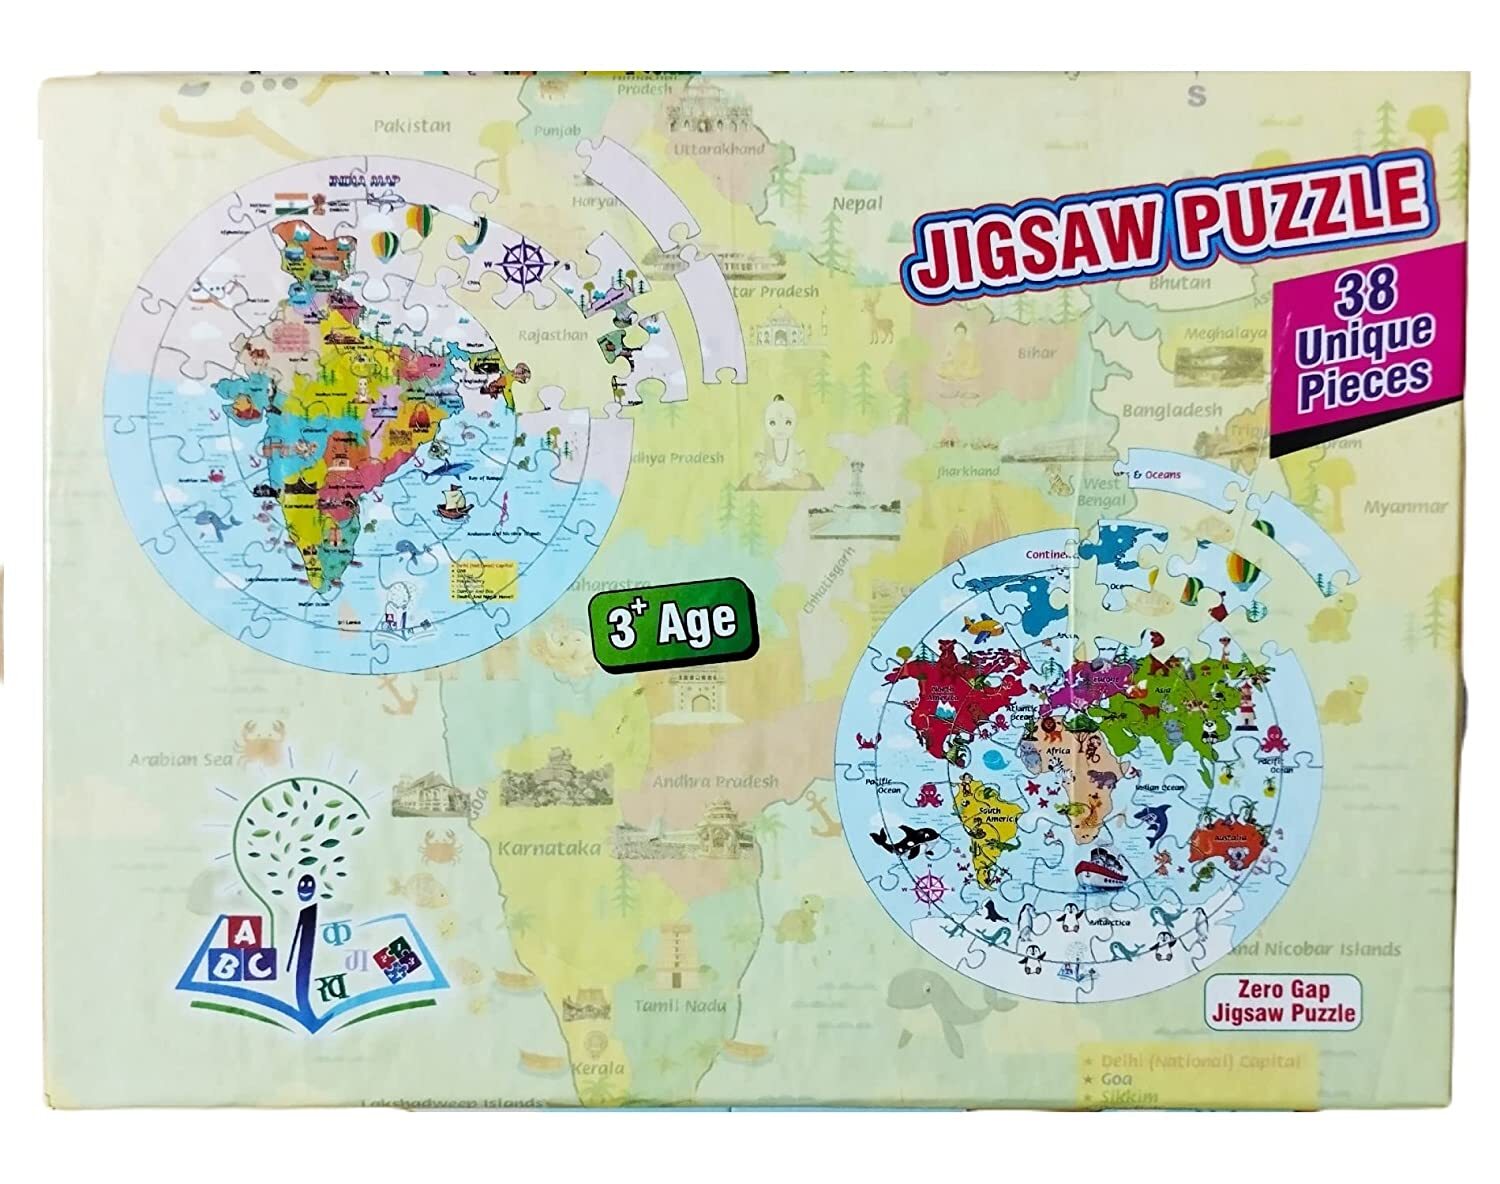 India Map Jigsaw Puzzle